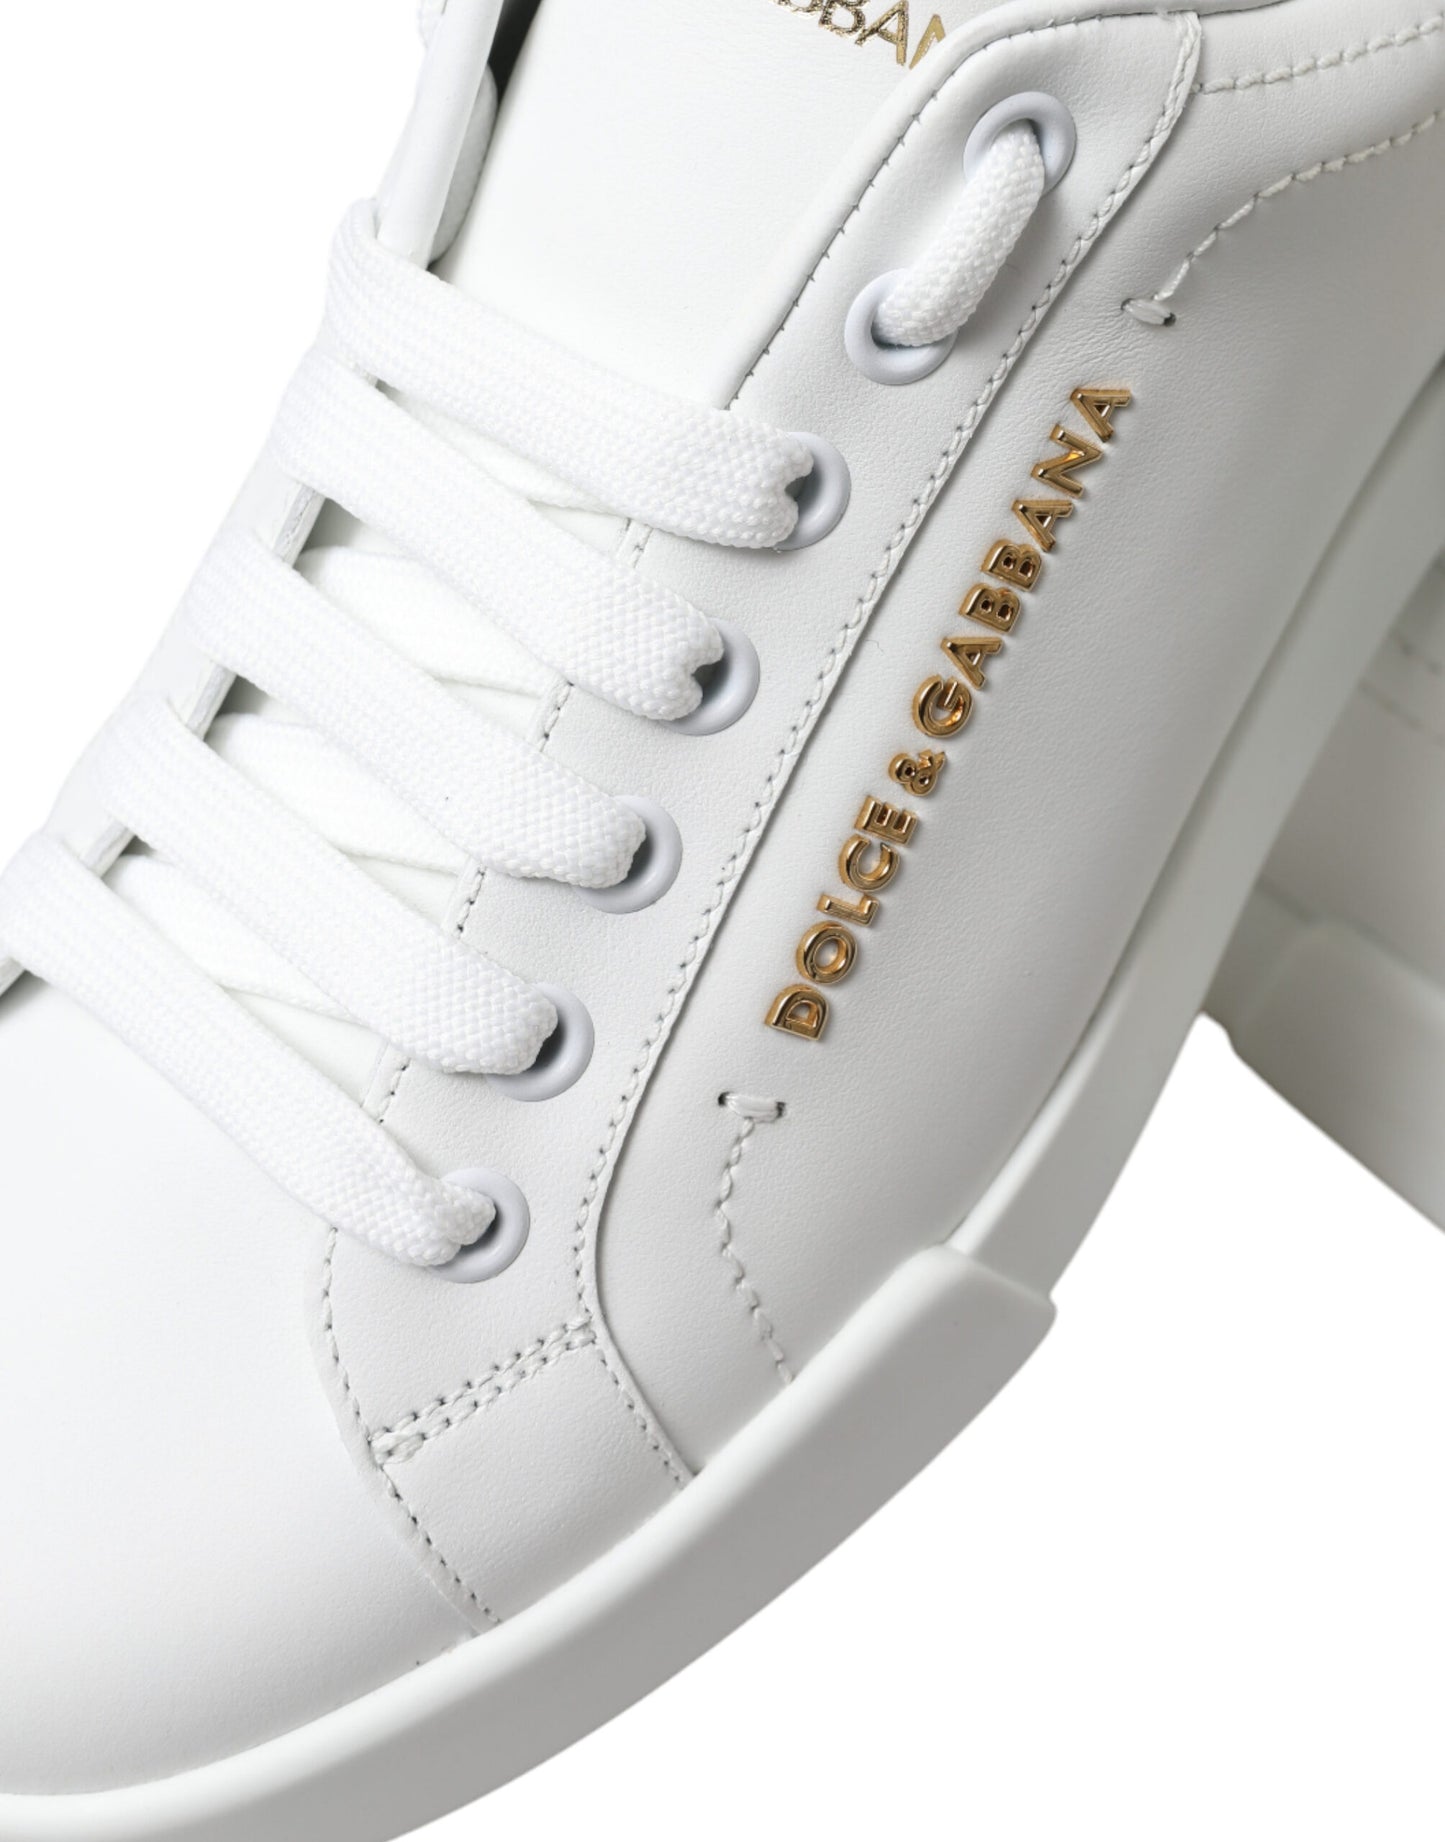 Dolce & Gabbana Chic White Sneakers with Green Heel Accent